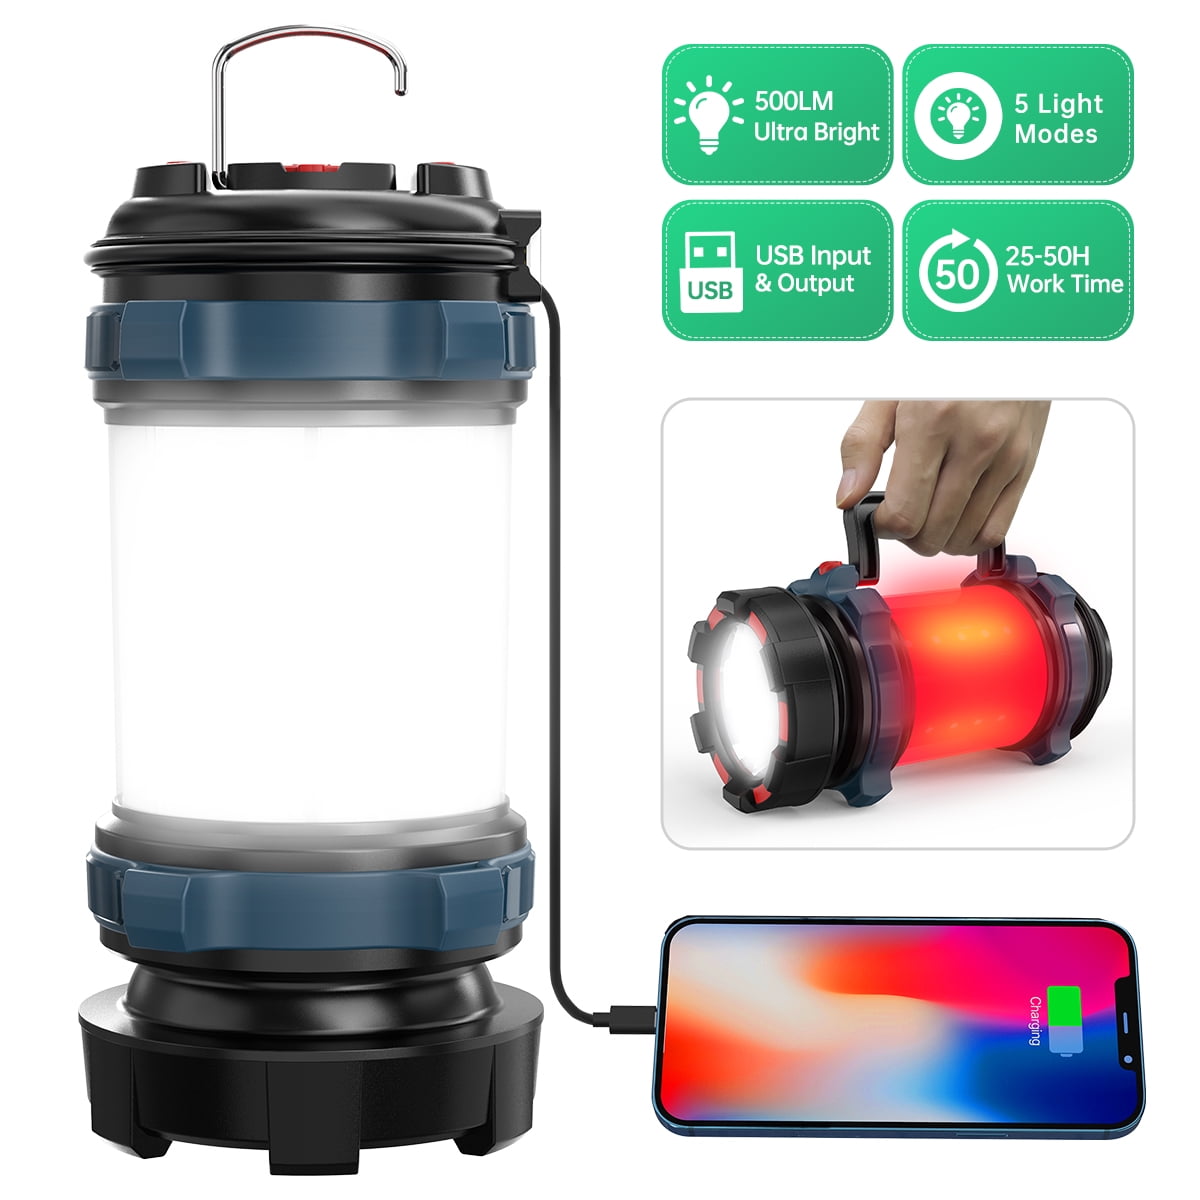 LED Camping Lantern Rechargeable Portable Tent Light Power Bank Phone Charger